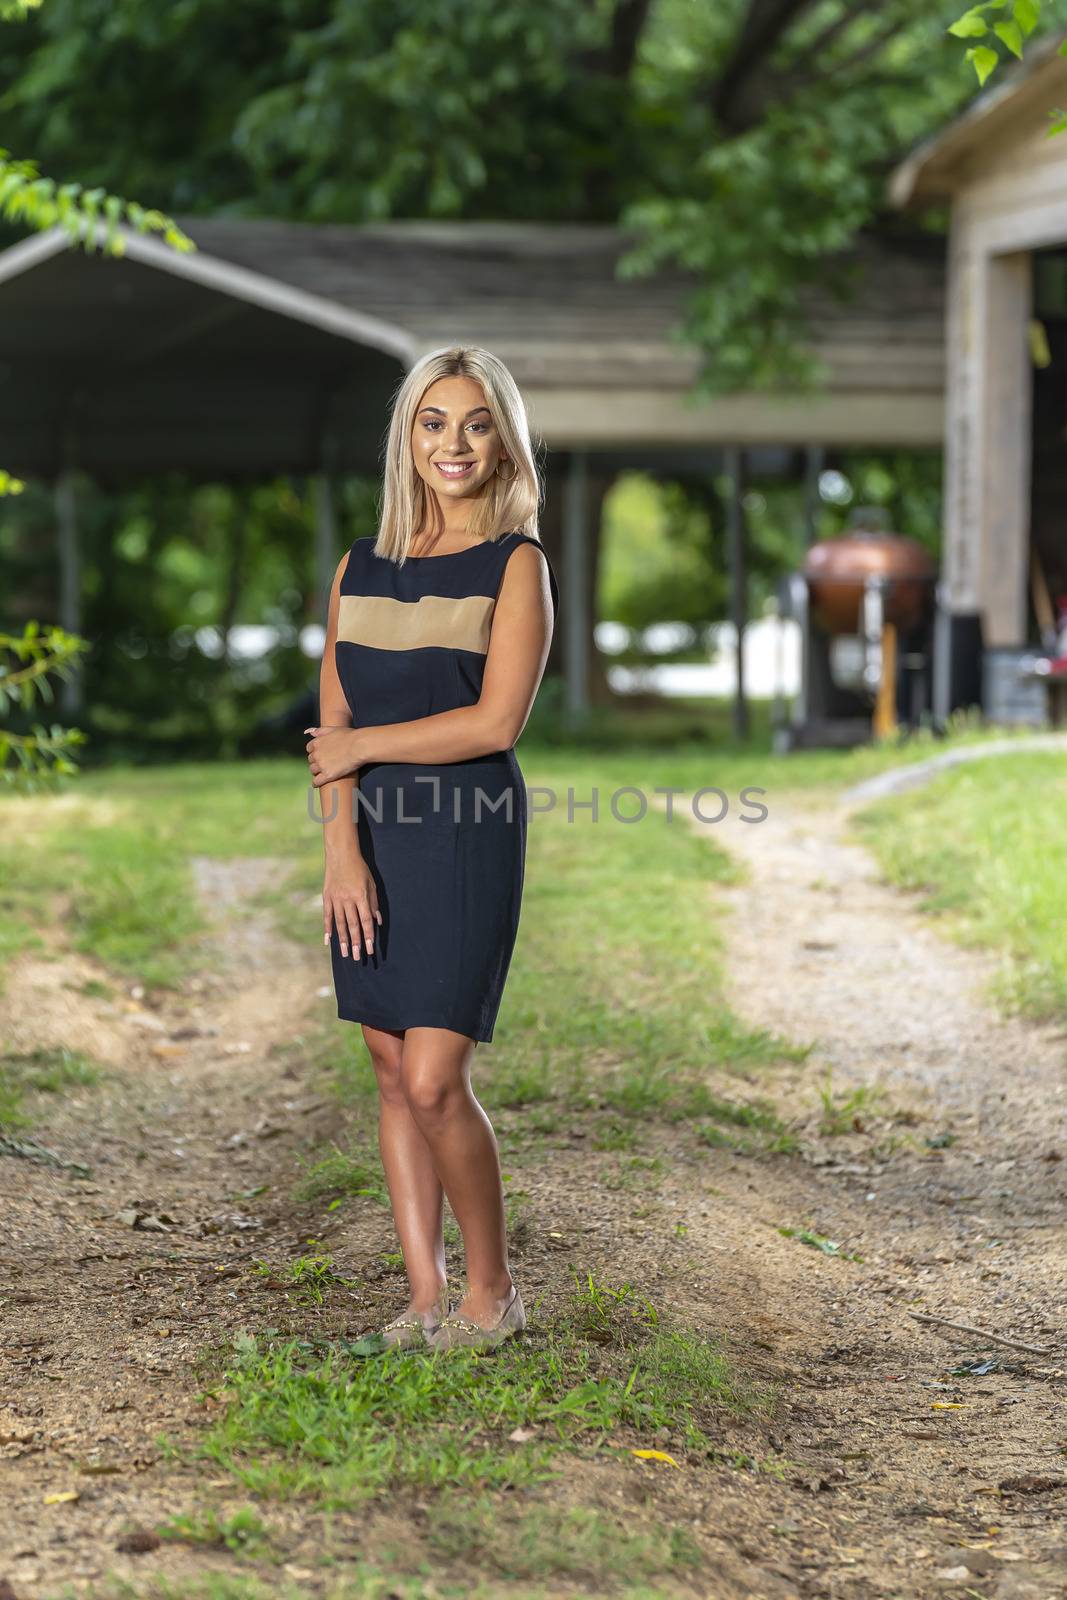 A Young Lovely Blonde Model Poses Outdoors While Enjoying A Summers Day by actionsports